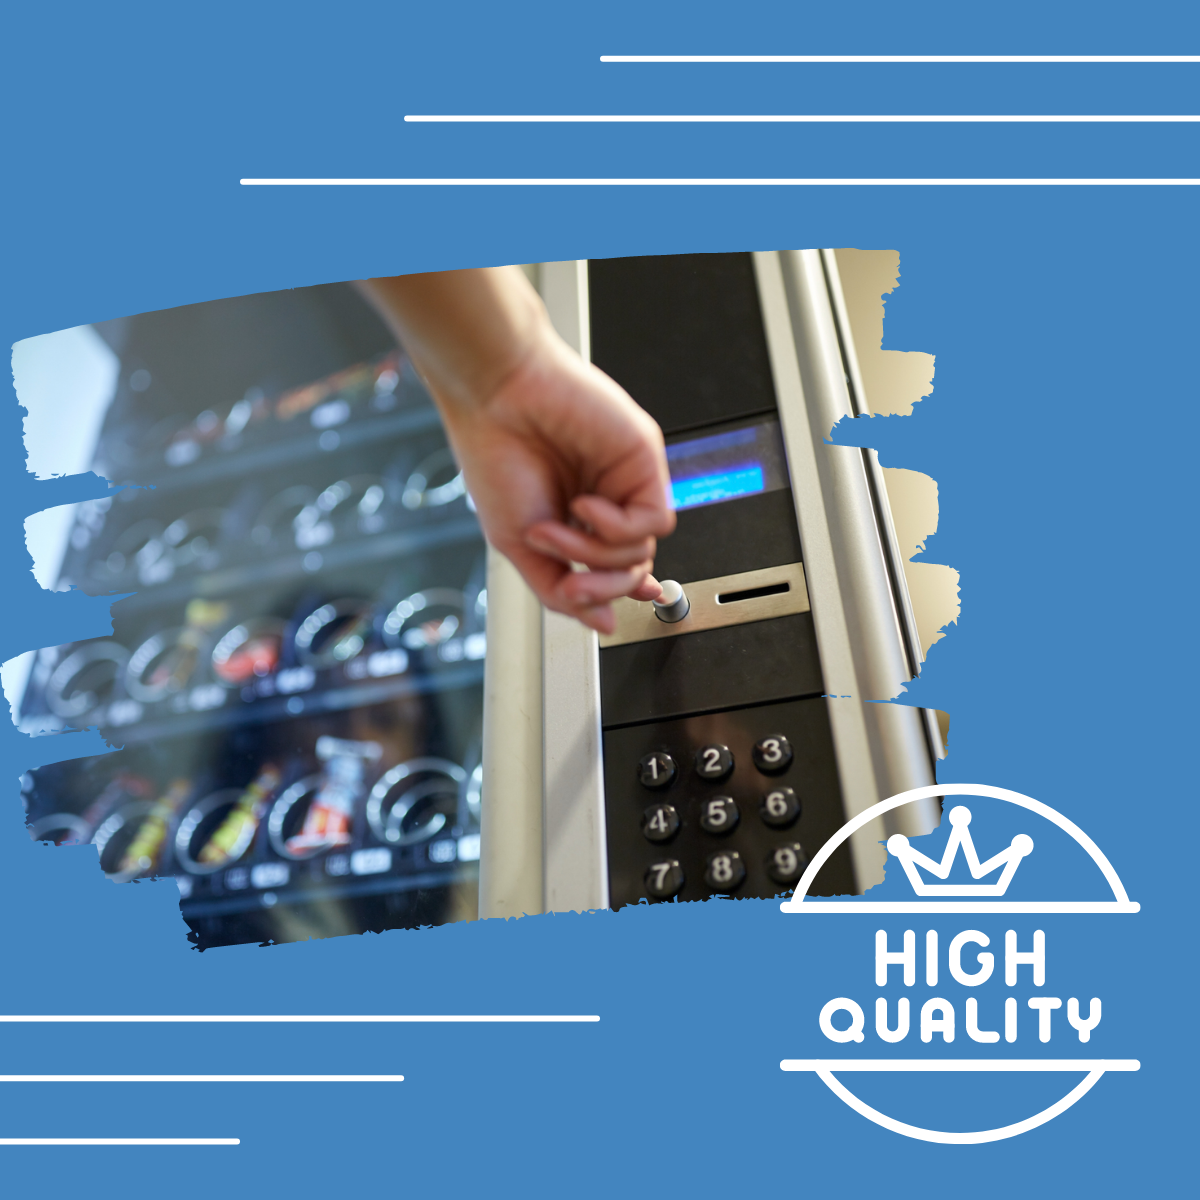 HIGH QUALITY, SIMPLE TO USE VENDING MACHINES